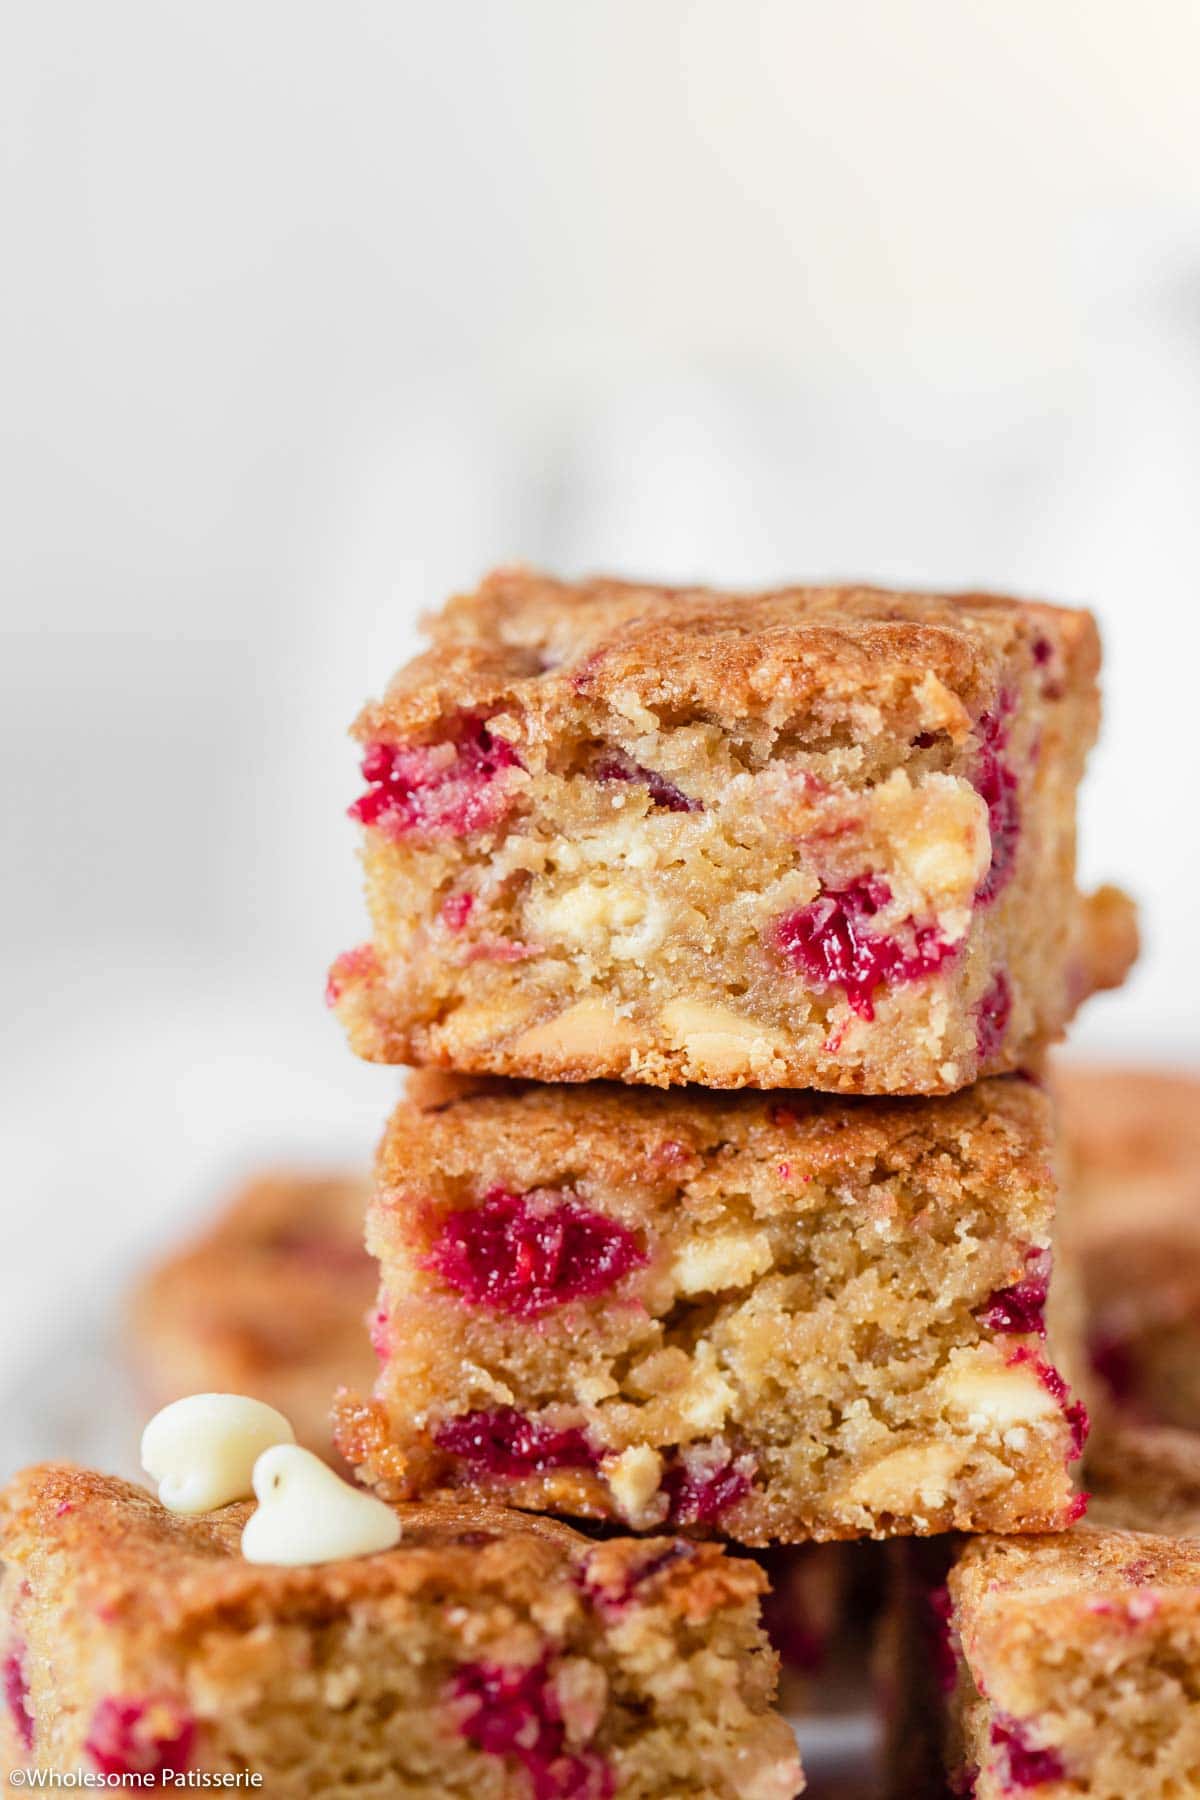 Close up shot of one blondie slice showing the texture, raspberries and chocolate chips